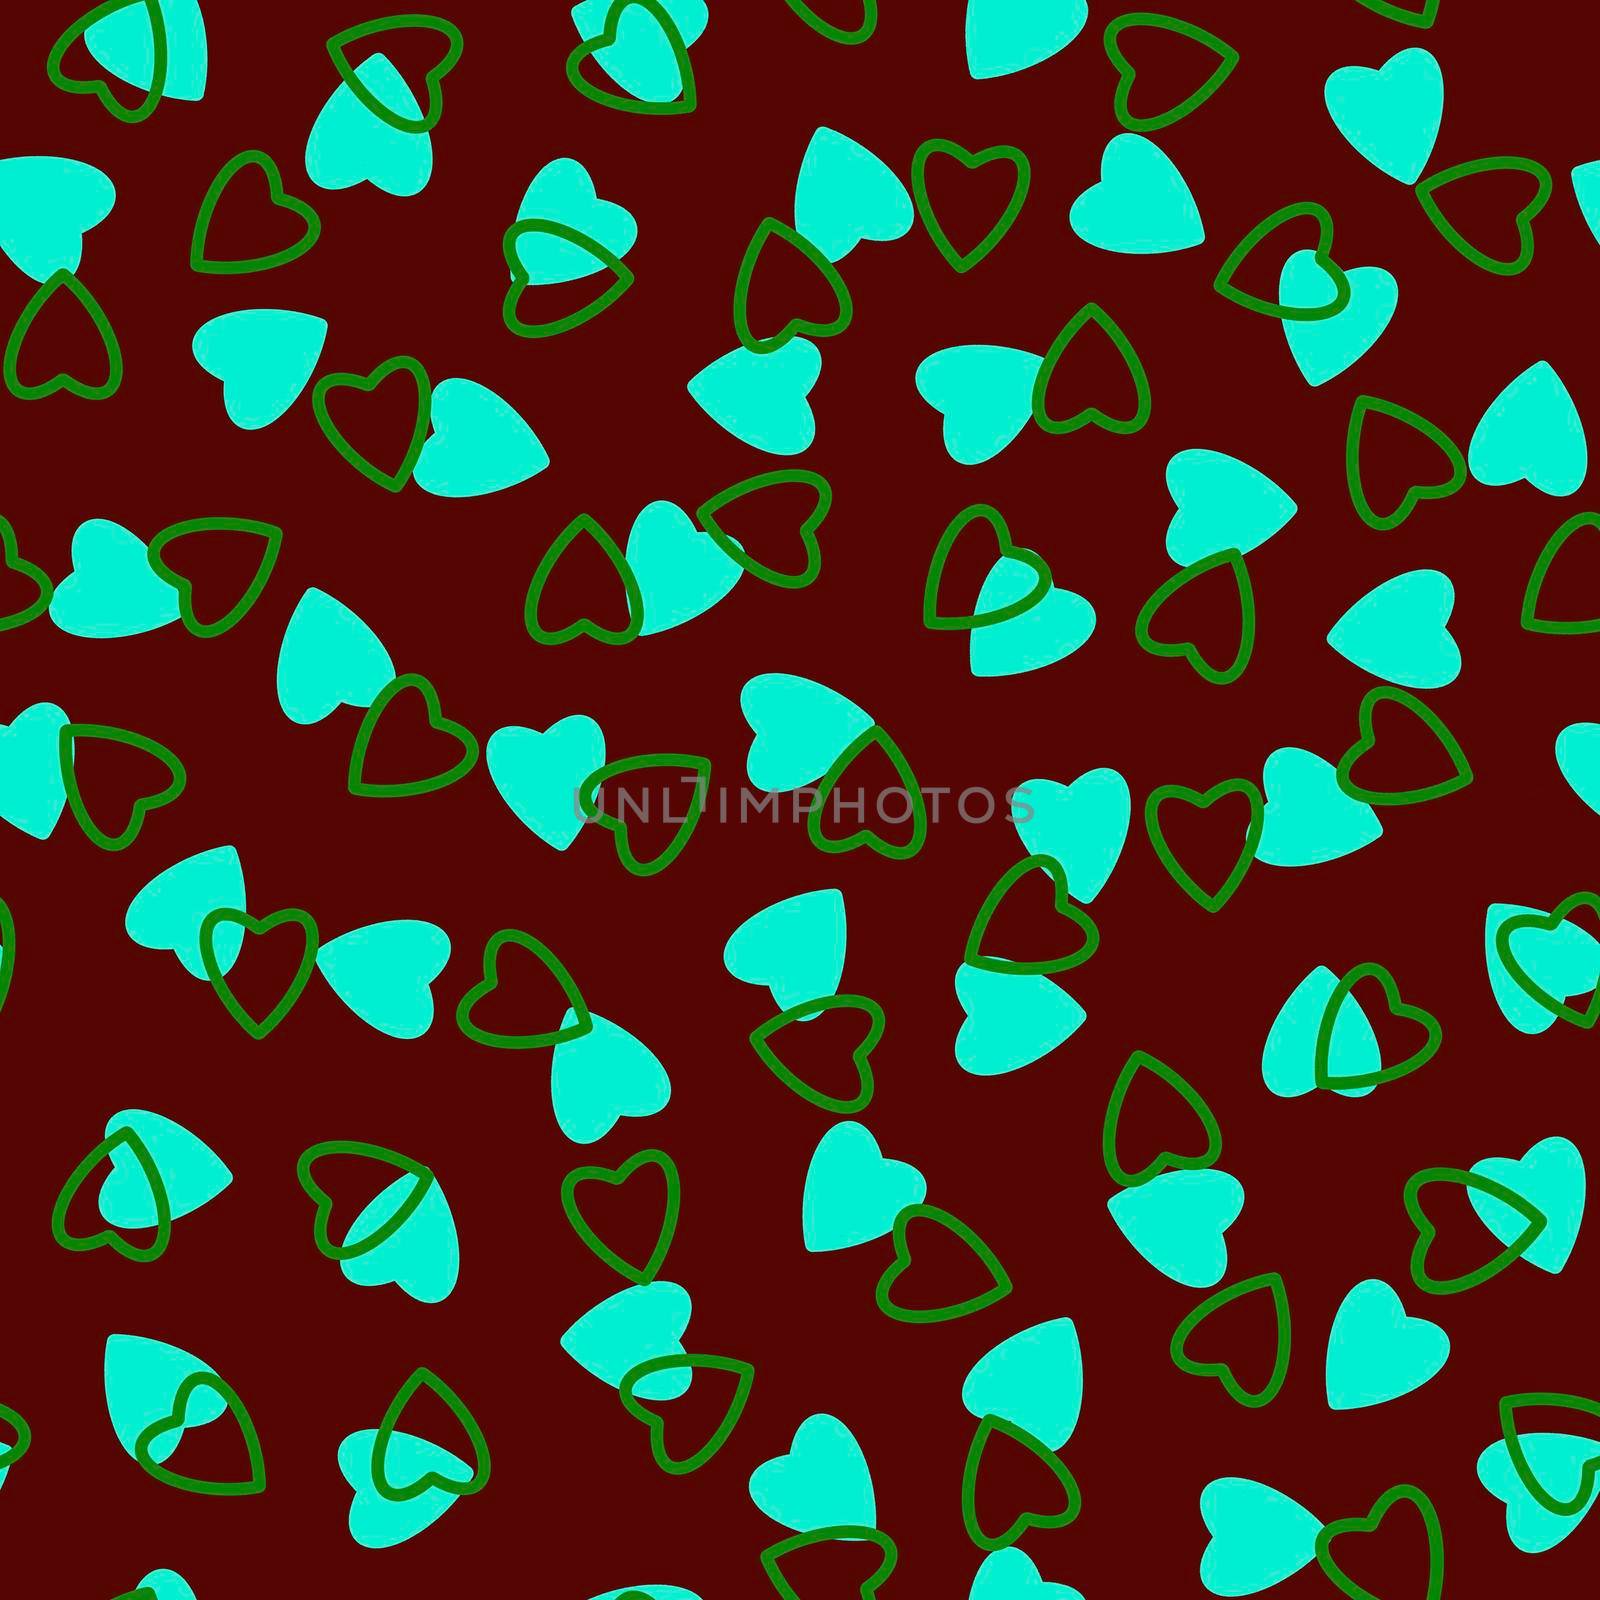 Simple heart seamless pattern,endless chaotic texture made tiny heart silhouettes.Valentines,mothers day background.Great for Easter,wedding,scrapbook,gift wrapping paper,textiles.Azure,green,burgundy by Angelsmoon